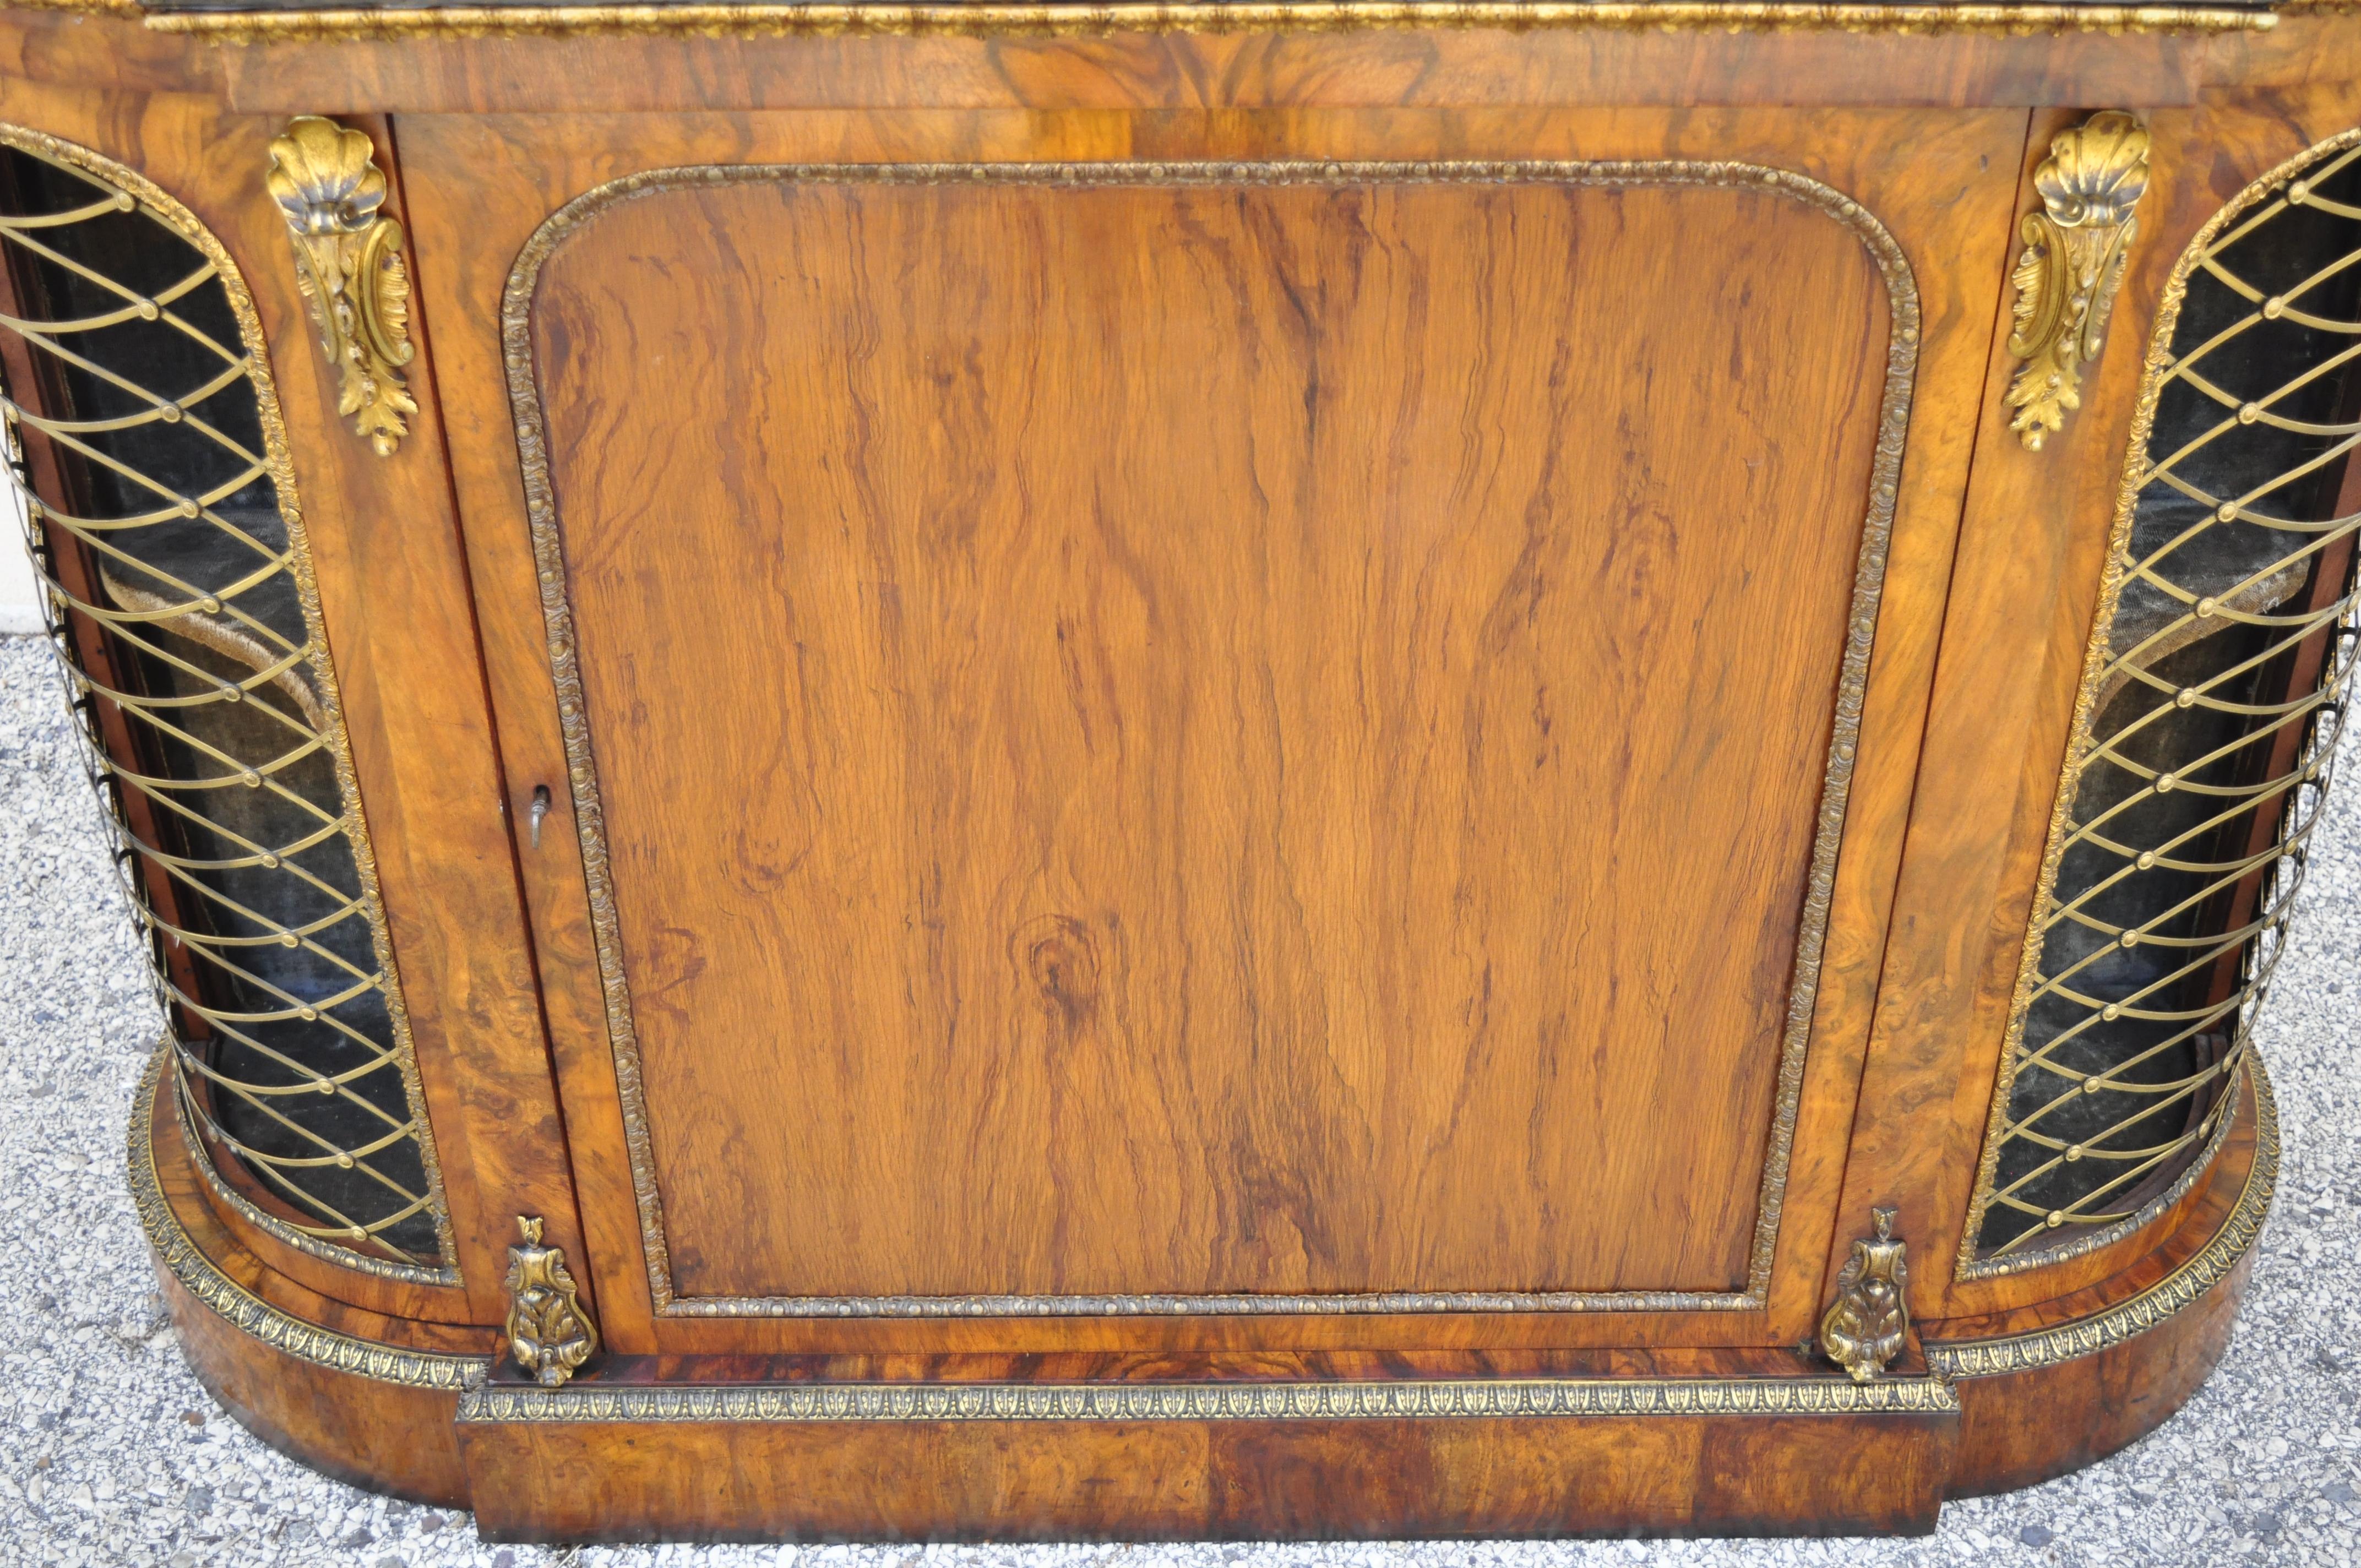 19th century Napoleon III style rosewood sideboard buffet credenza cabinet with brass lattice. Item features shaped wooden top with faux marbleized finish, blue velvet interior, bronze/brass ormolu, beautiful rosewood veneer, 1 swing door, working